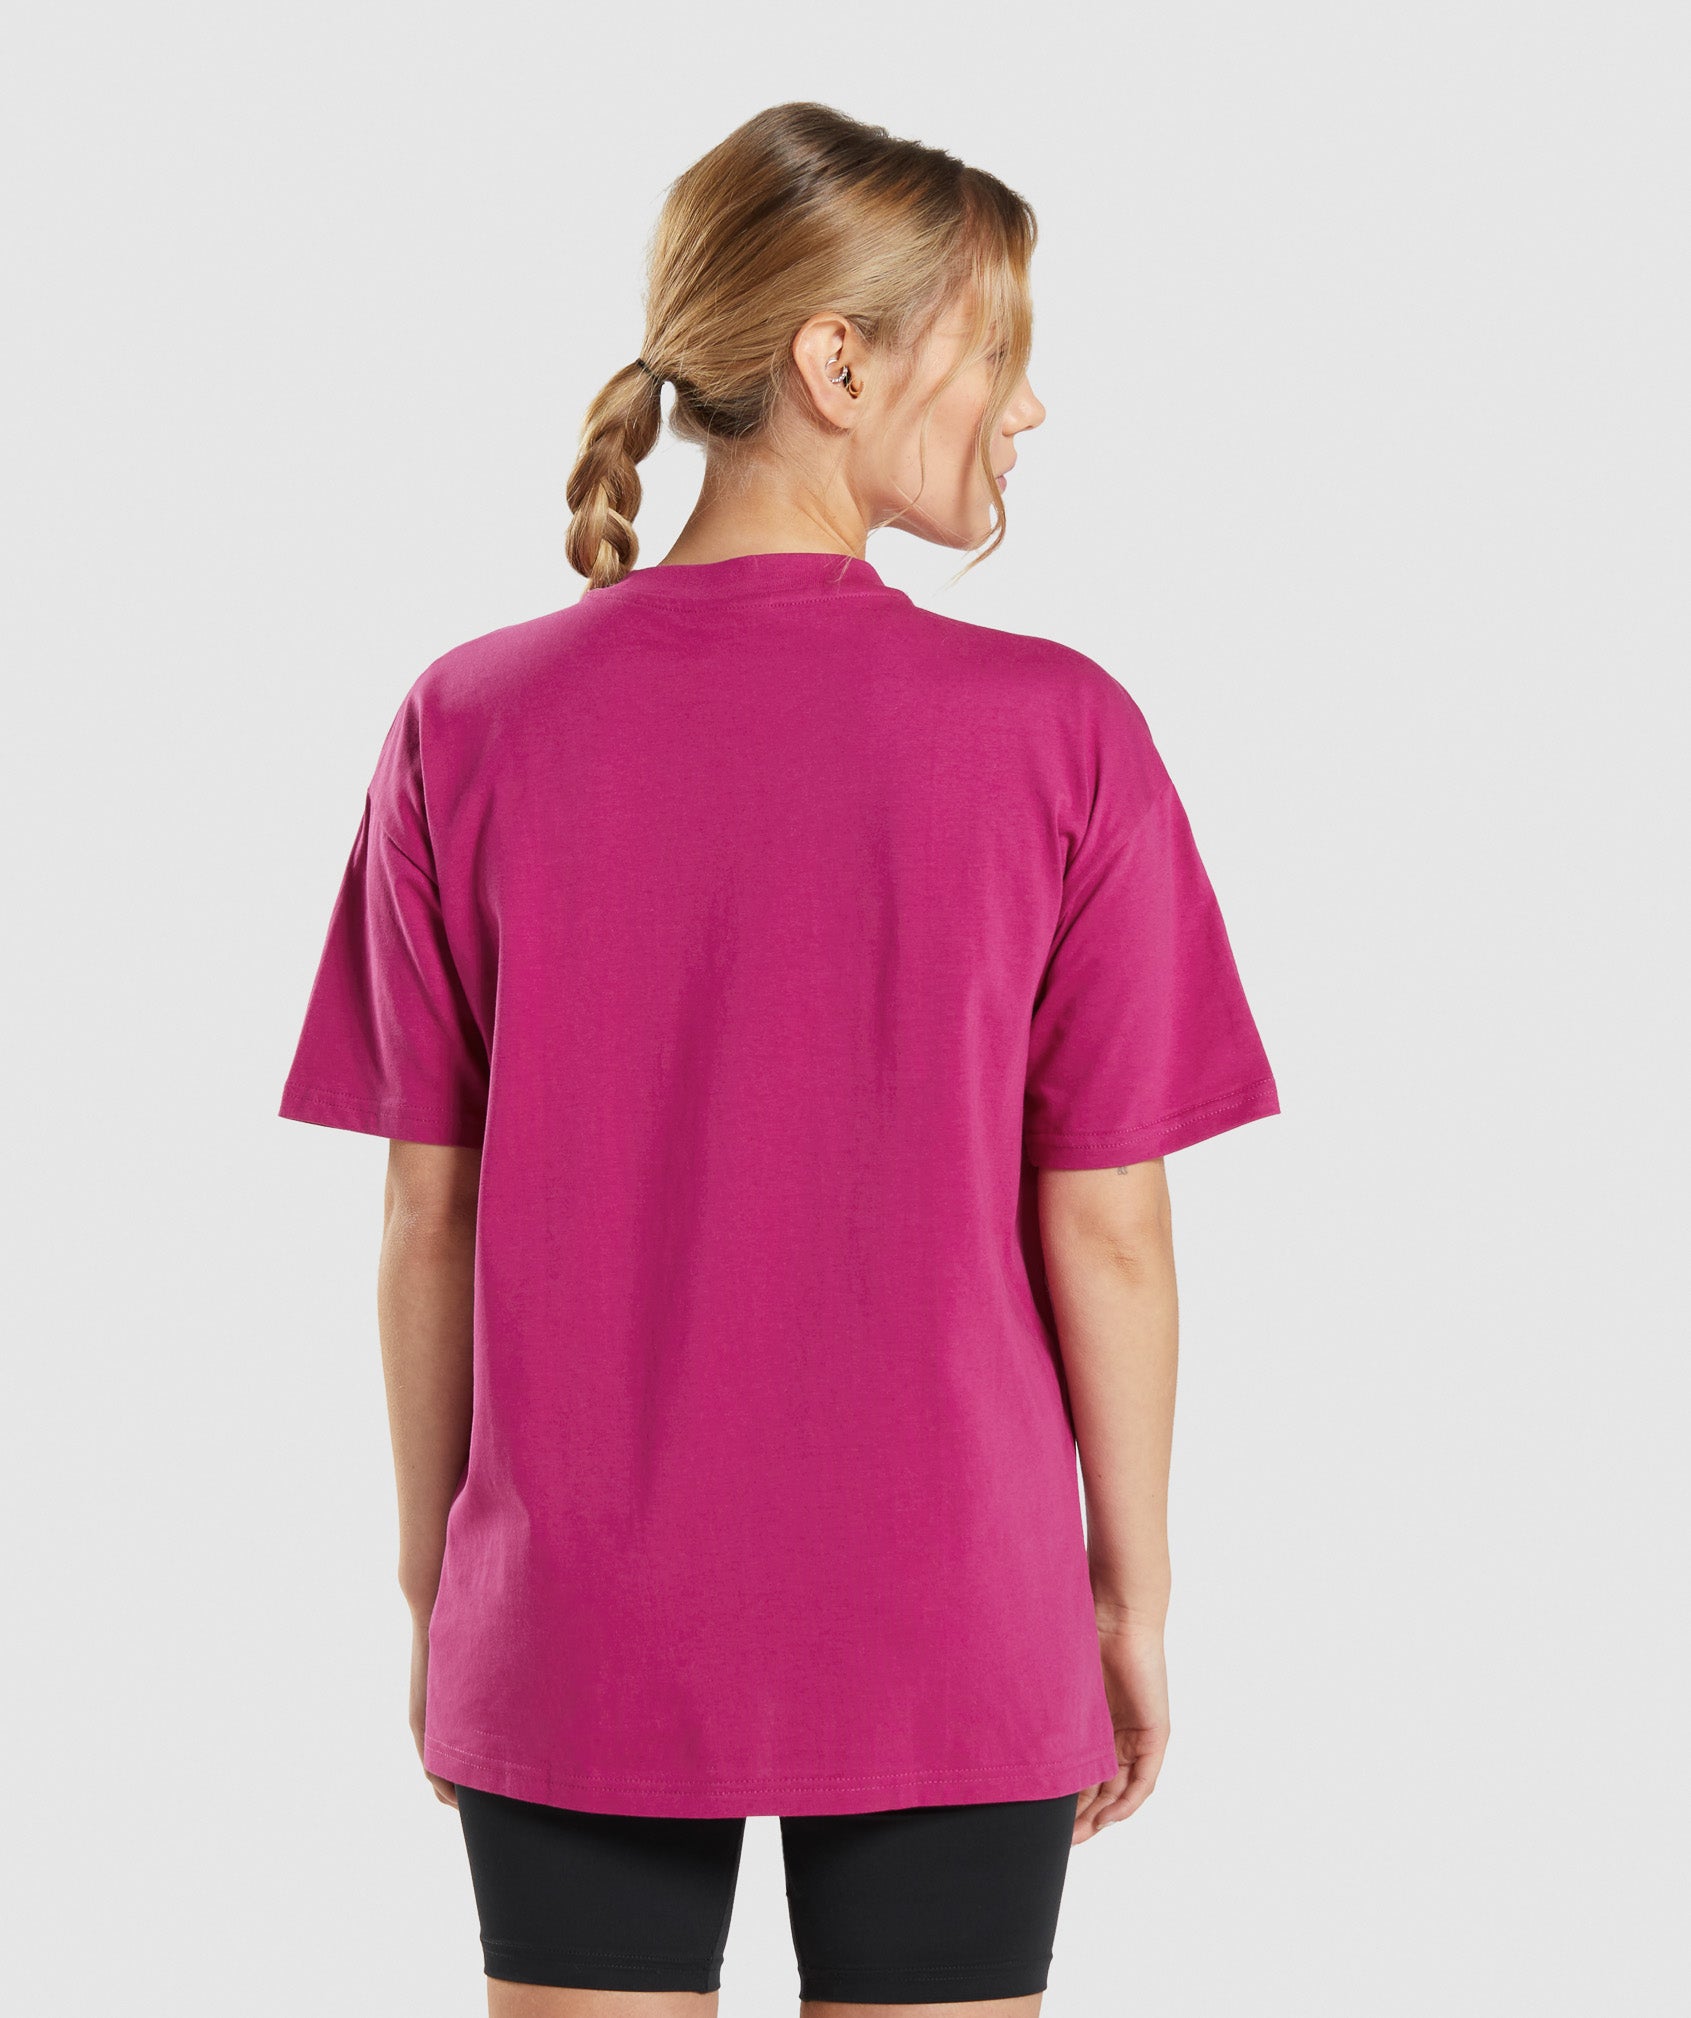 Ultimate Oversized T-Shirt in Dark Pink